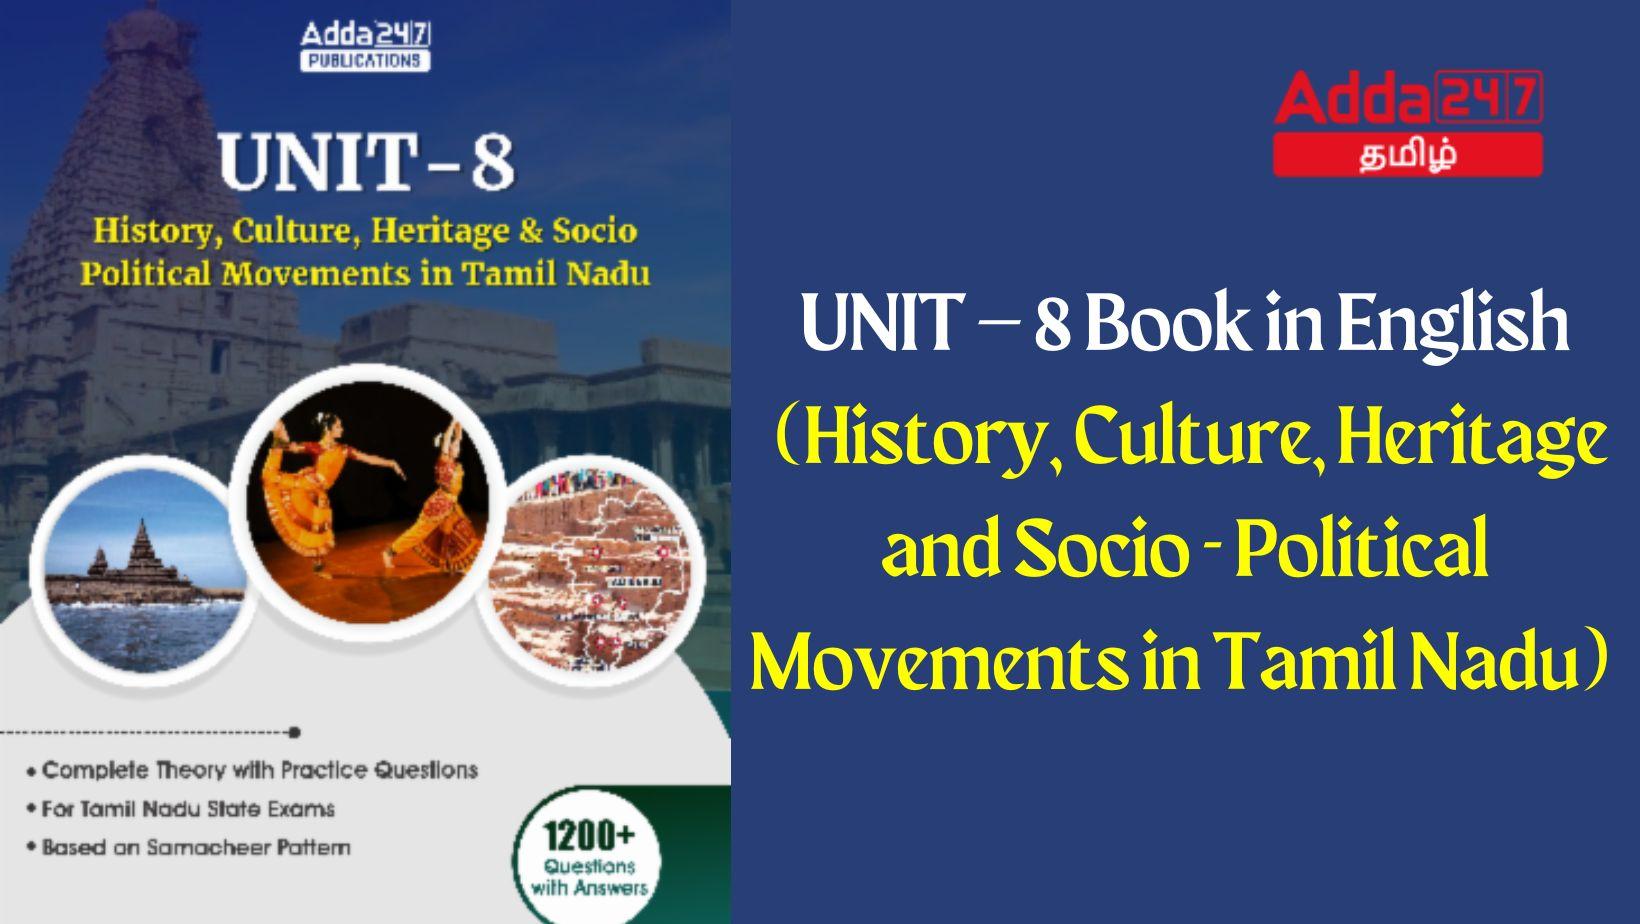 Unit 8 Book in English - History, Culture, Heritage and Socio - Political Movements in Tamil Nadu_20.1